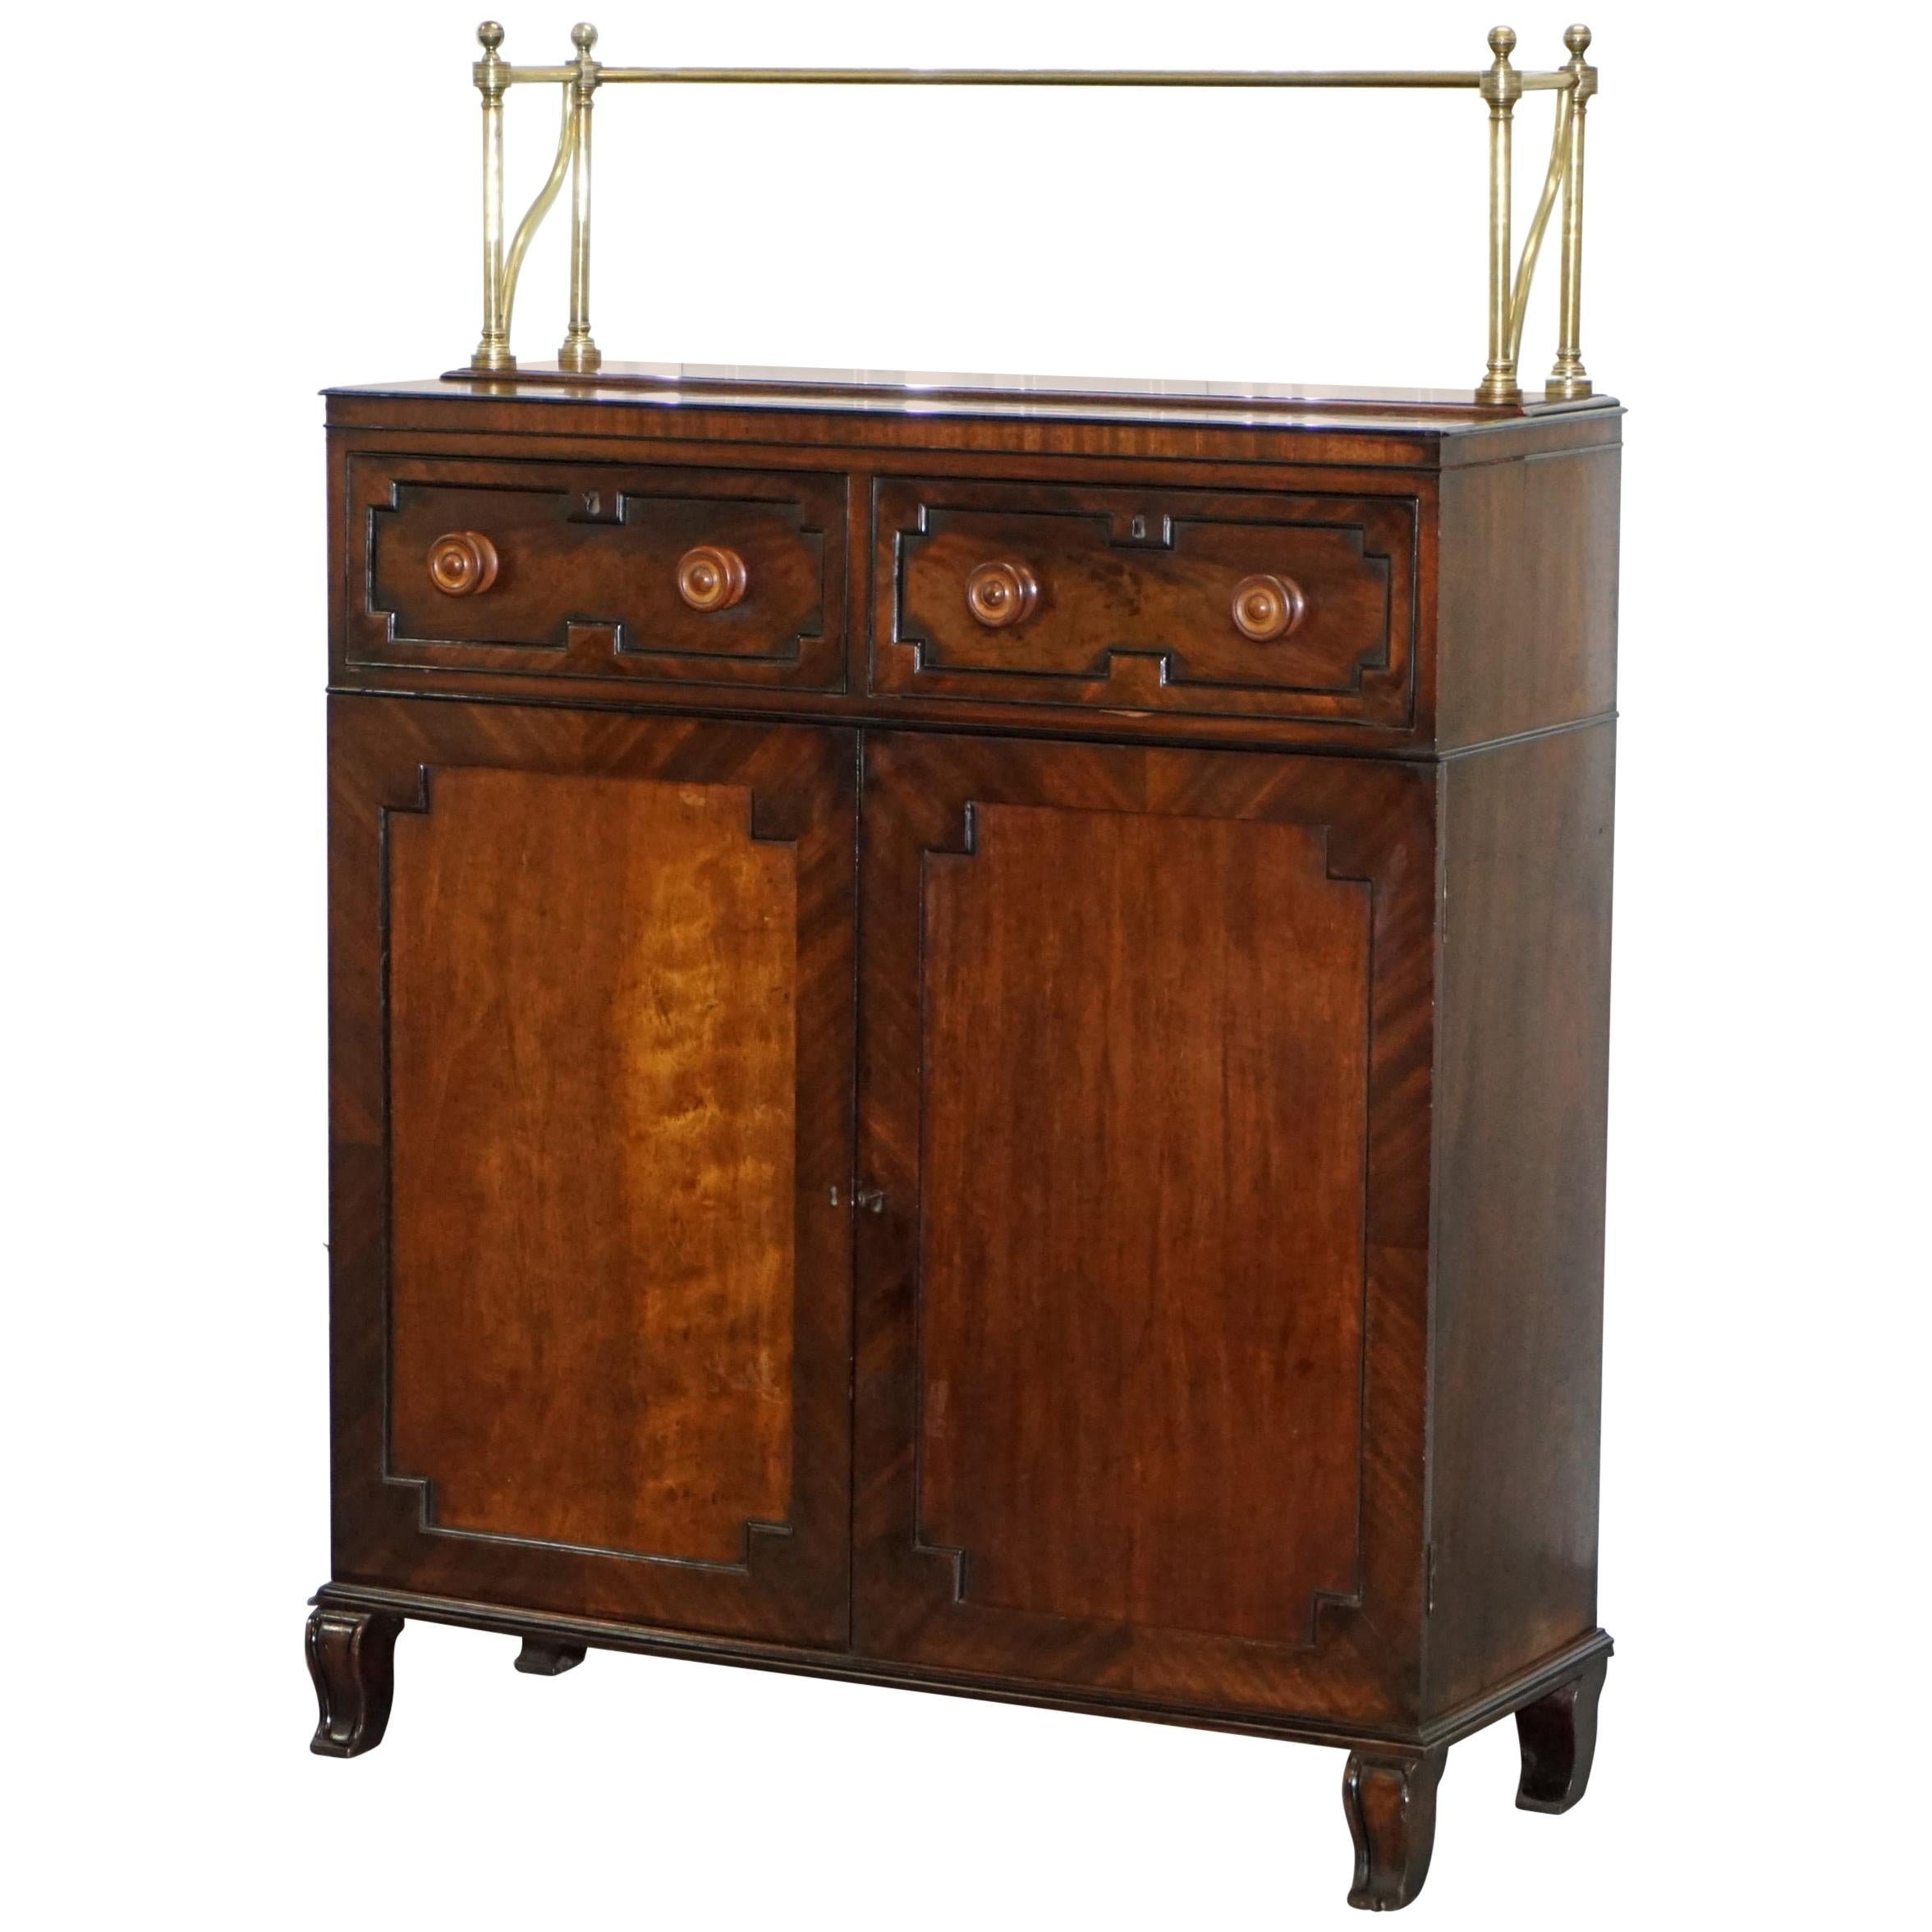 Regency Chiffonier with Large Brass Gallery & Flamed Hardwood Sideboard Gillows